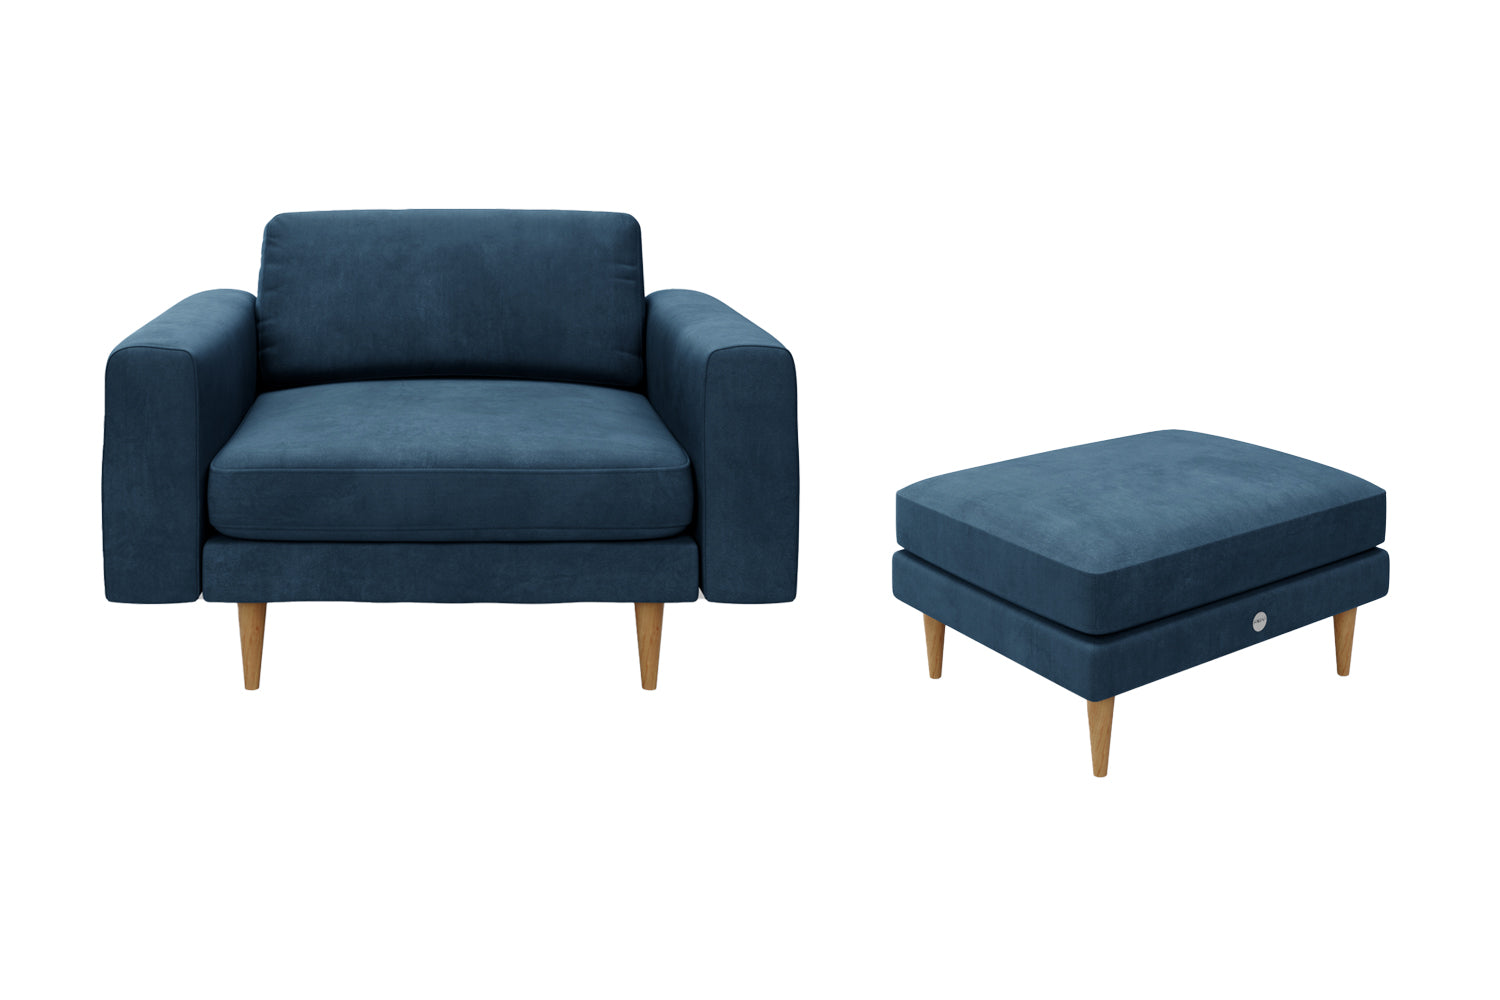 The Big Chill - 1.5 Seater Snuggler and Footstool Set - Blue Steel